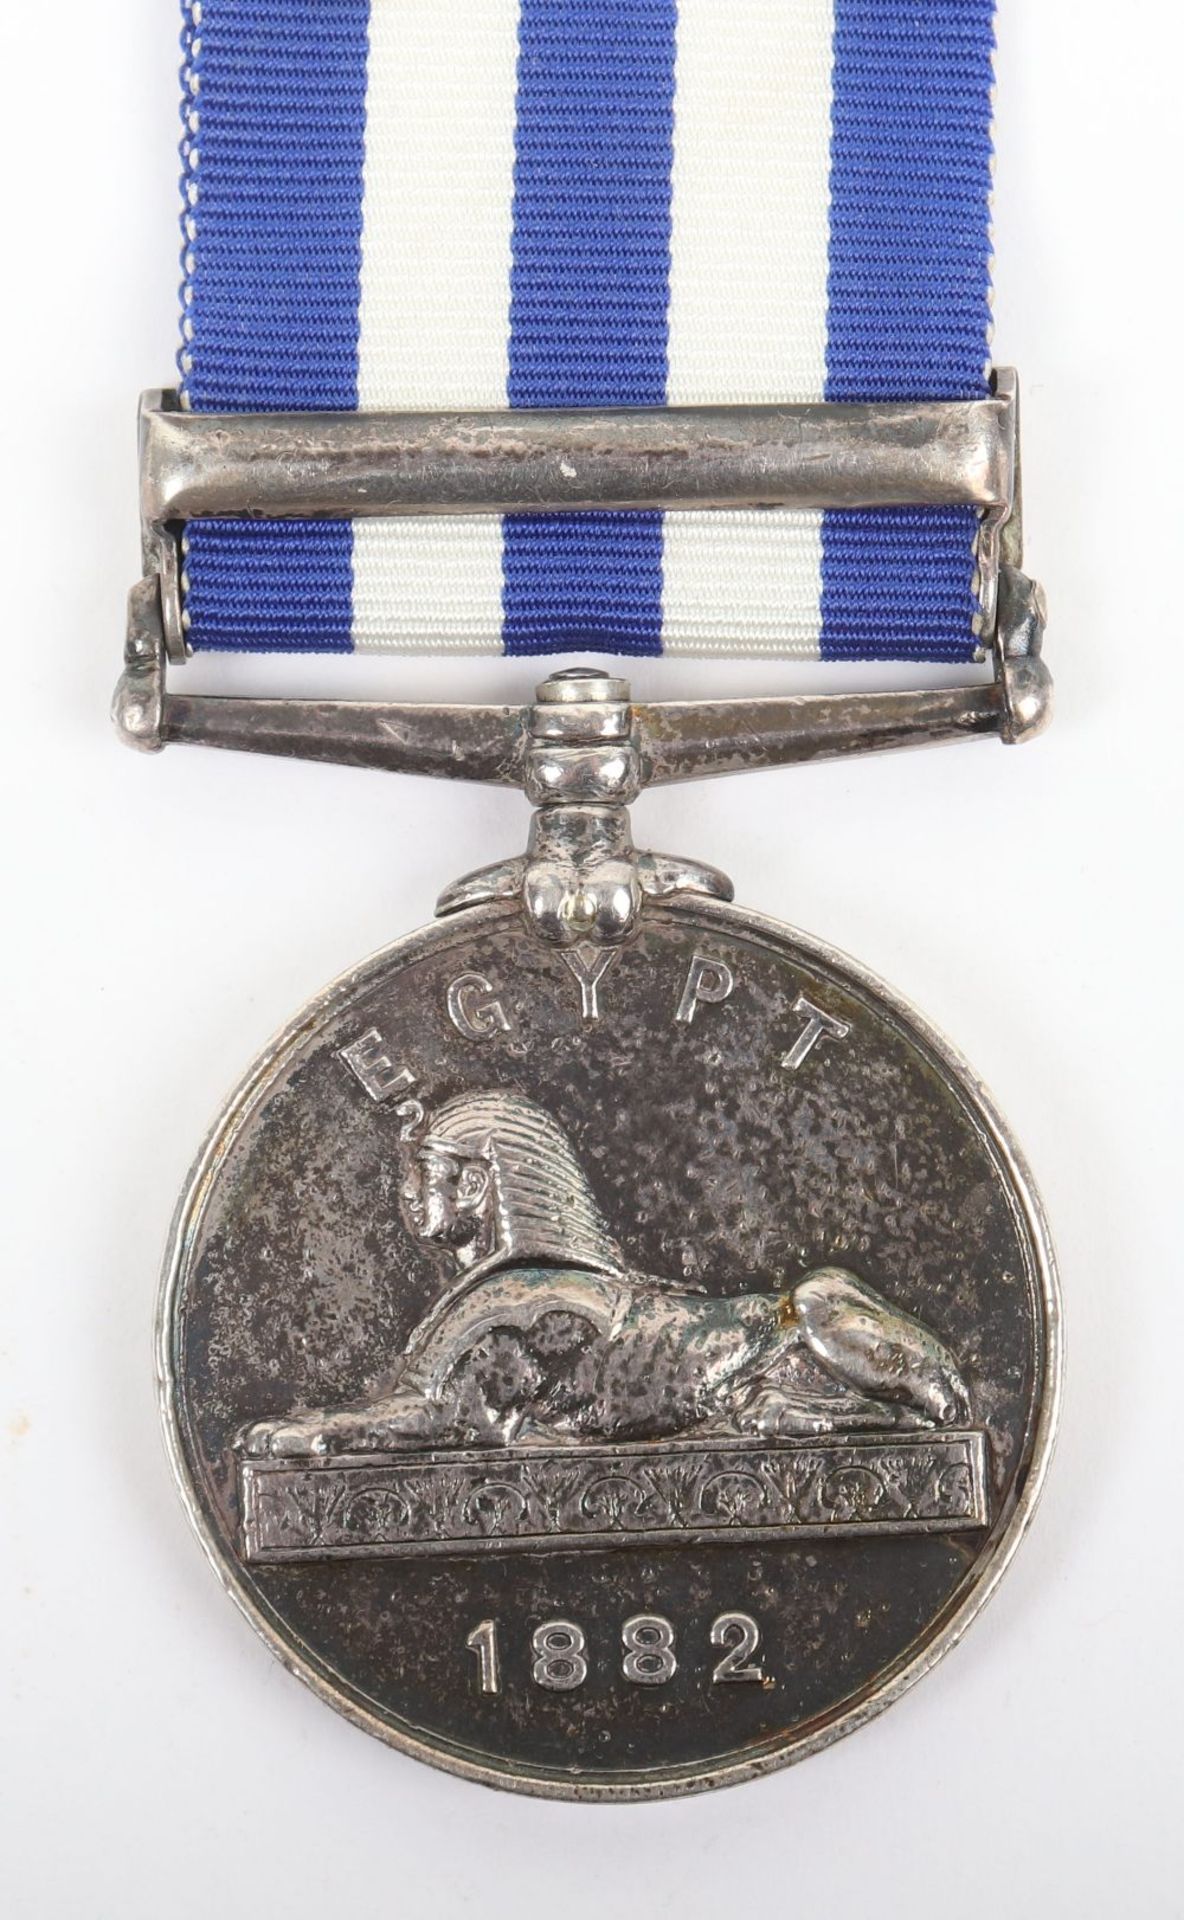 British Egypt and Sudan 1882-89 Campaign Medal 5th Battery 1st Battalion Scottish Royal Artillery - Image 4 of 4